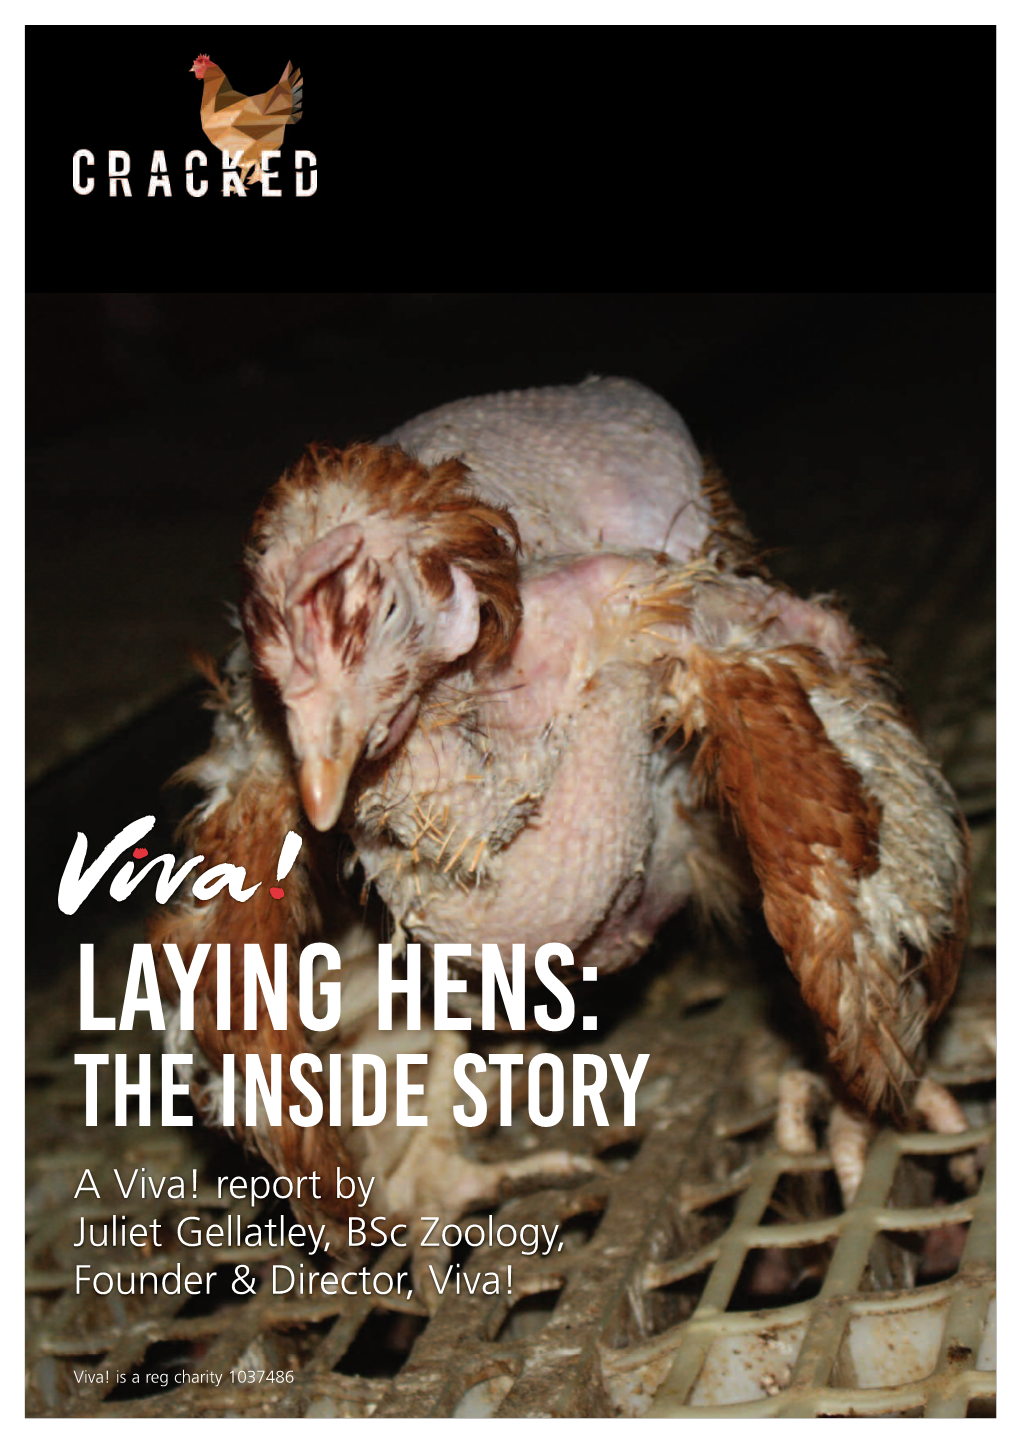 LAYING HENS: the INSIDE STORY a Viva! Report by Juliet Gellatley, Bsc Zoology, Founder & Director, Viva!